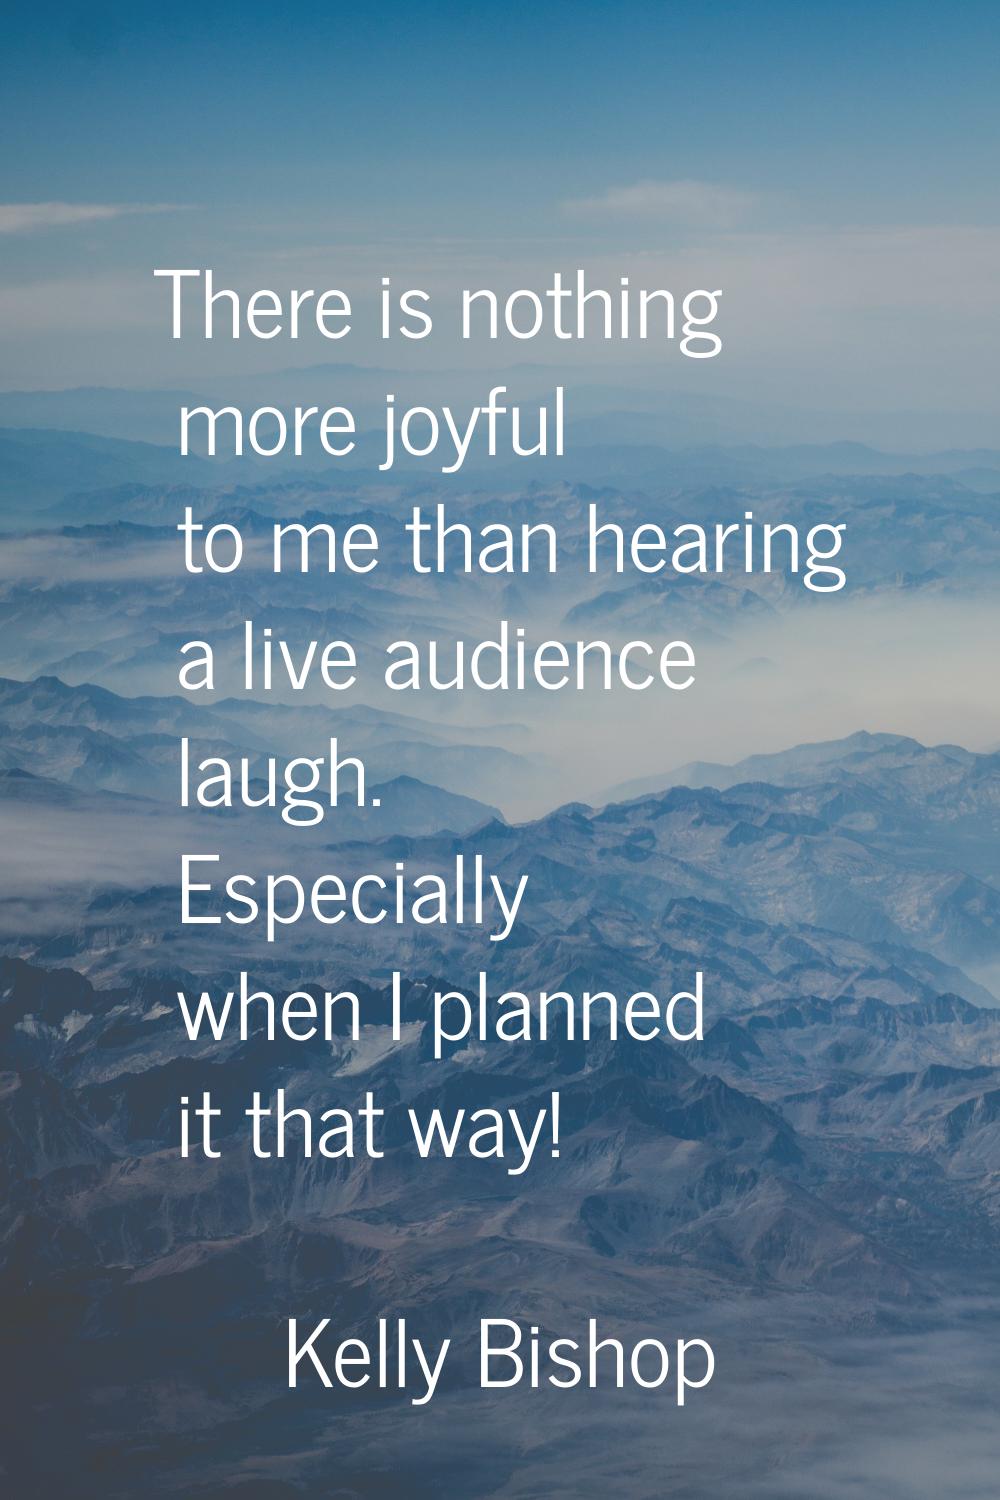 There is nothing more joyful to me than hearing a live audience laugh. Especially when I planned it